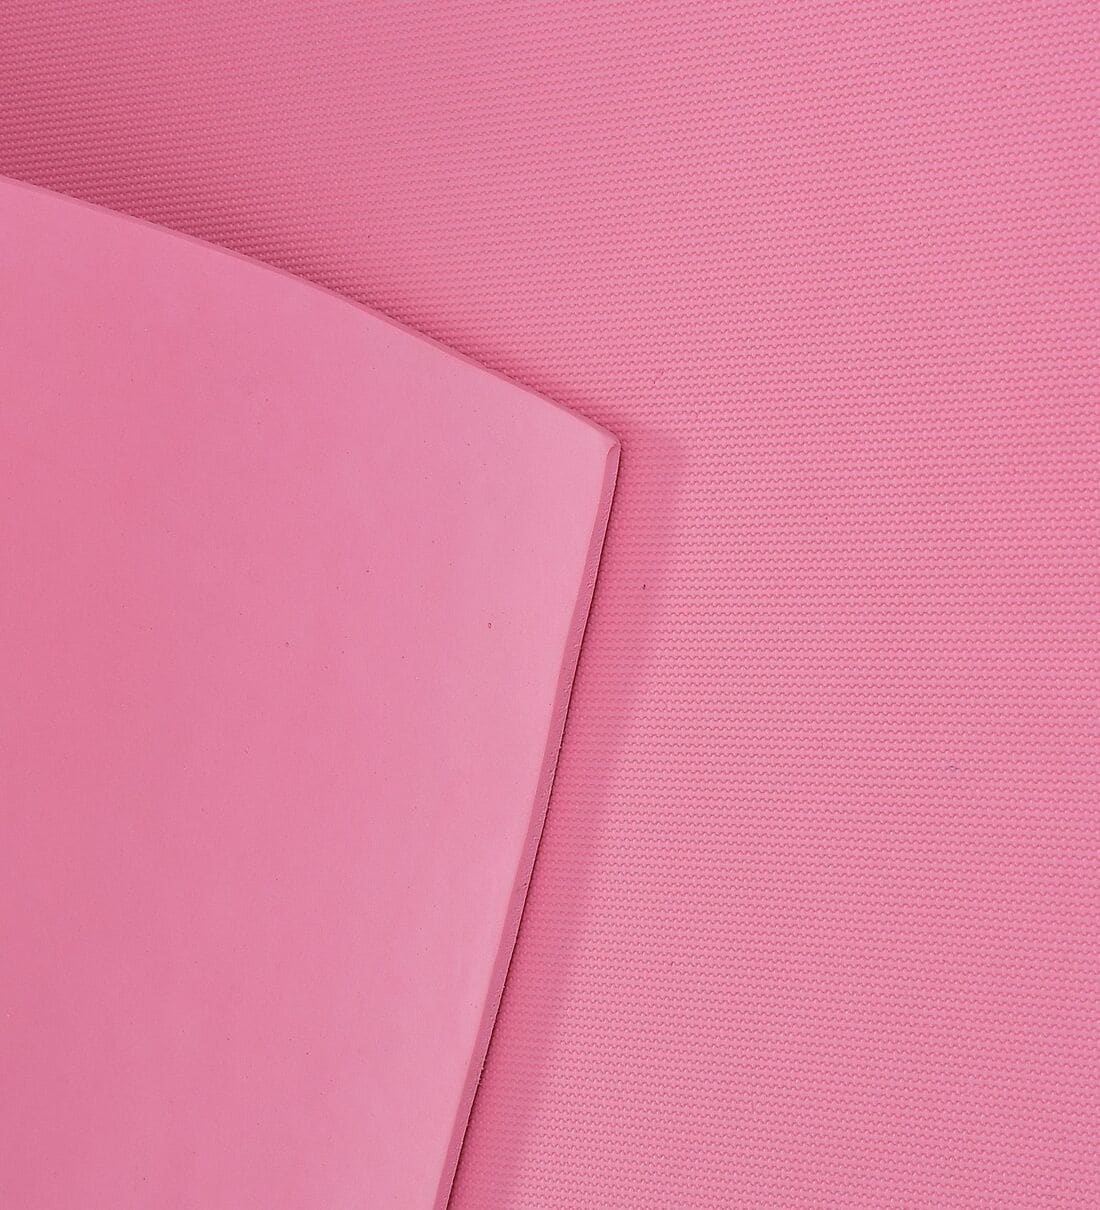 Buy Pink EEVA Foldable 6 mm Anti Skid 6 ft x 2 ft Yoga Mat By COMFIDELITAS  at 76% OFF by COMFIDELITAS